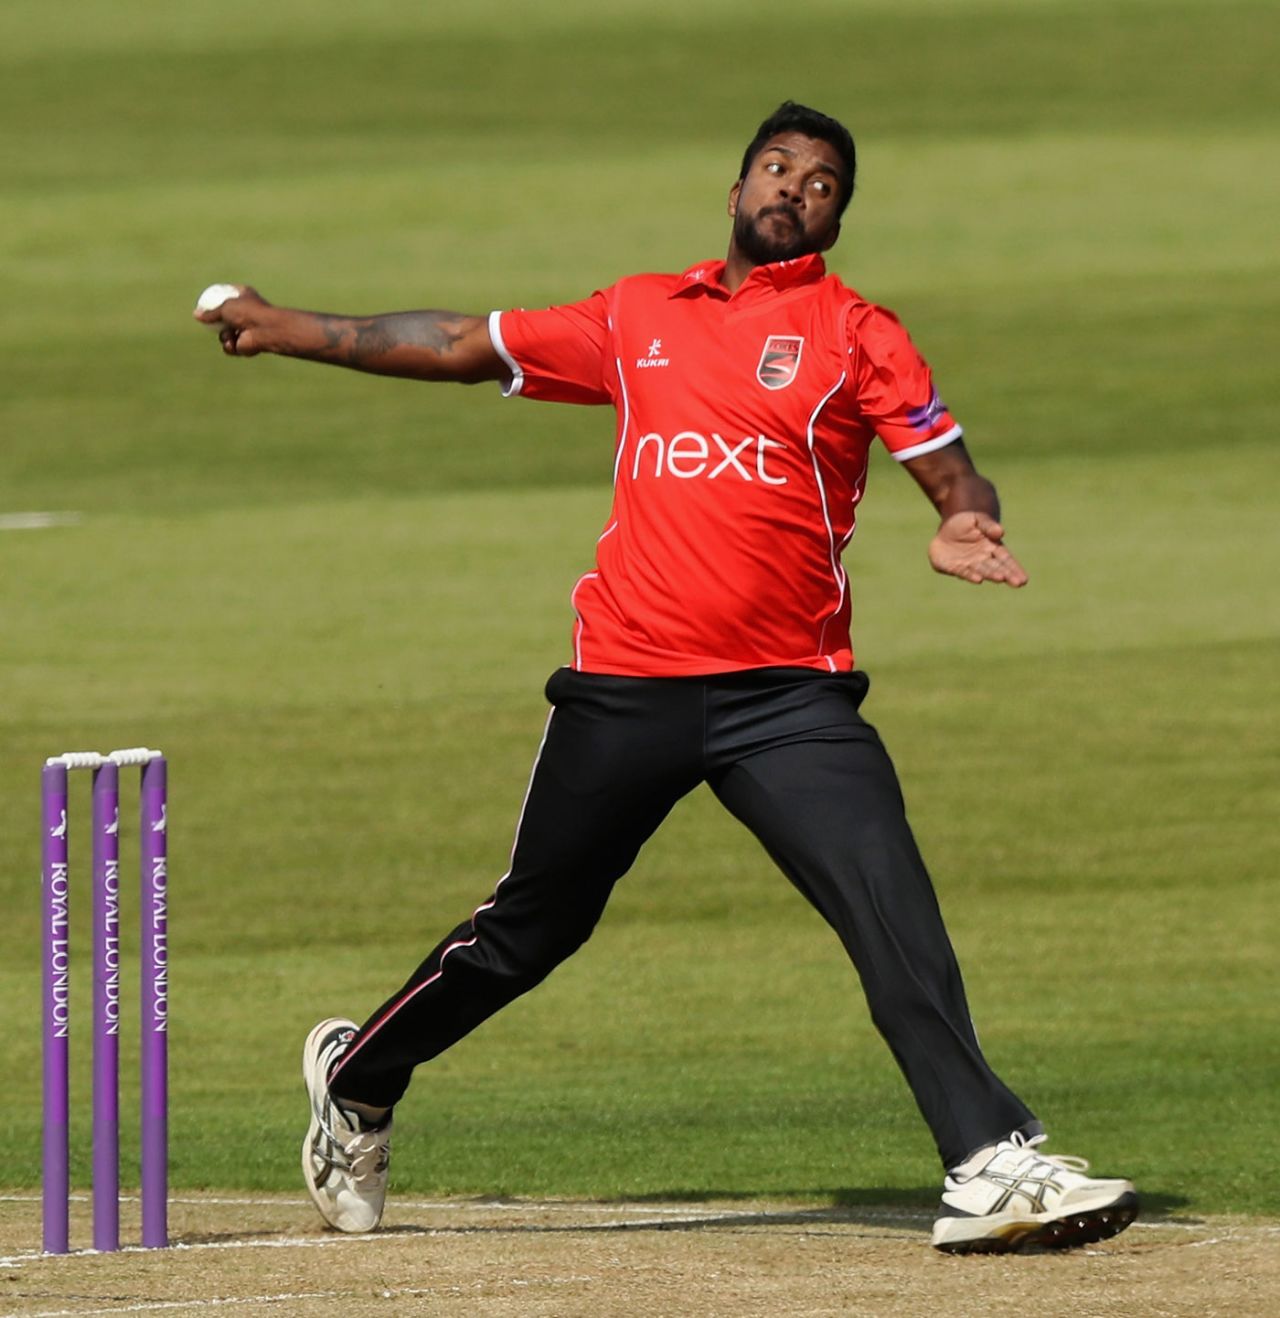 Varun Aaron bowls for Leicestershire, Northants v Leicestershire, Royal London Cup, Northampton, May 17, 2018